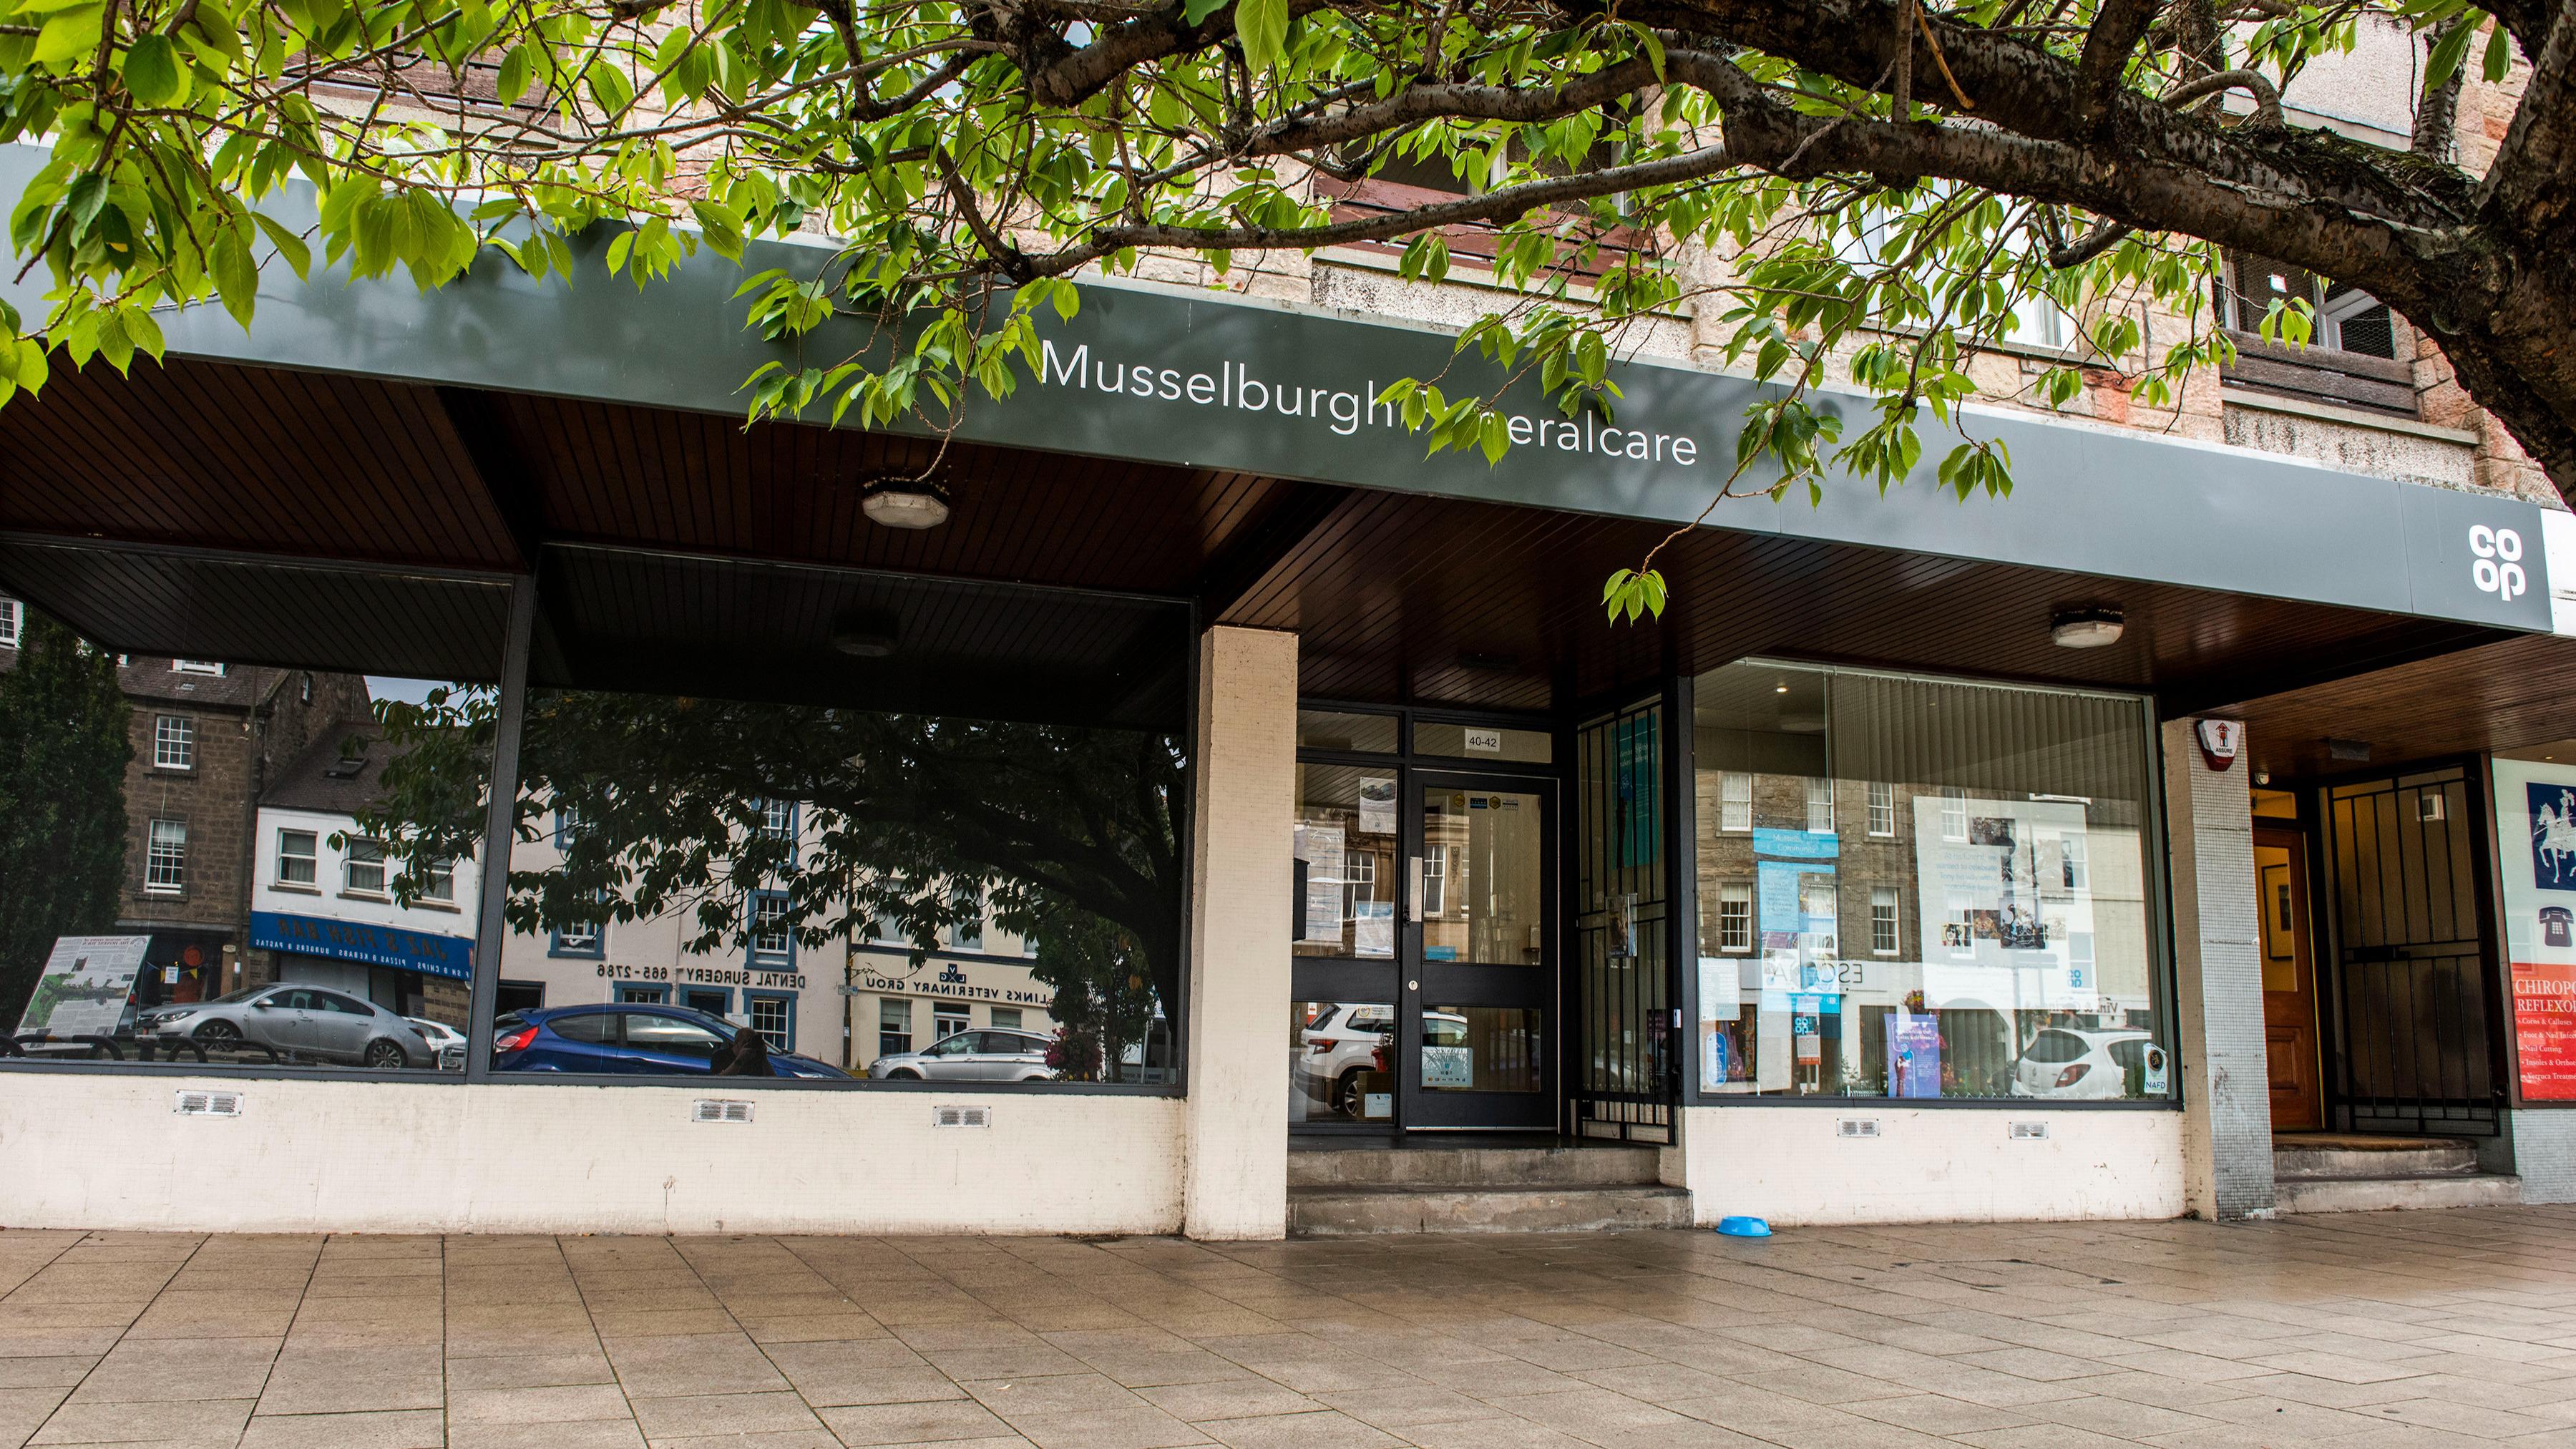 Images Musselburgh Funeralcare